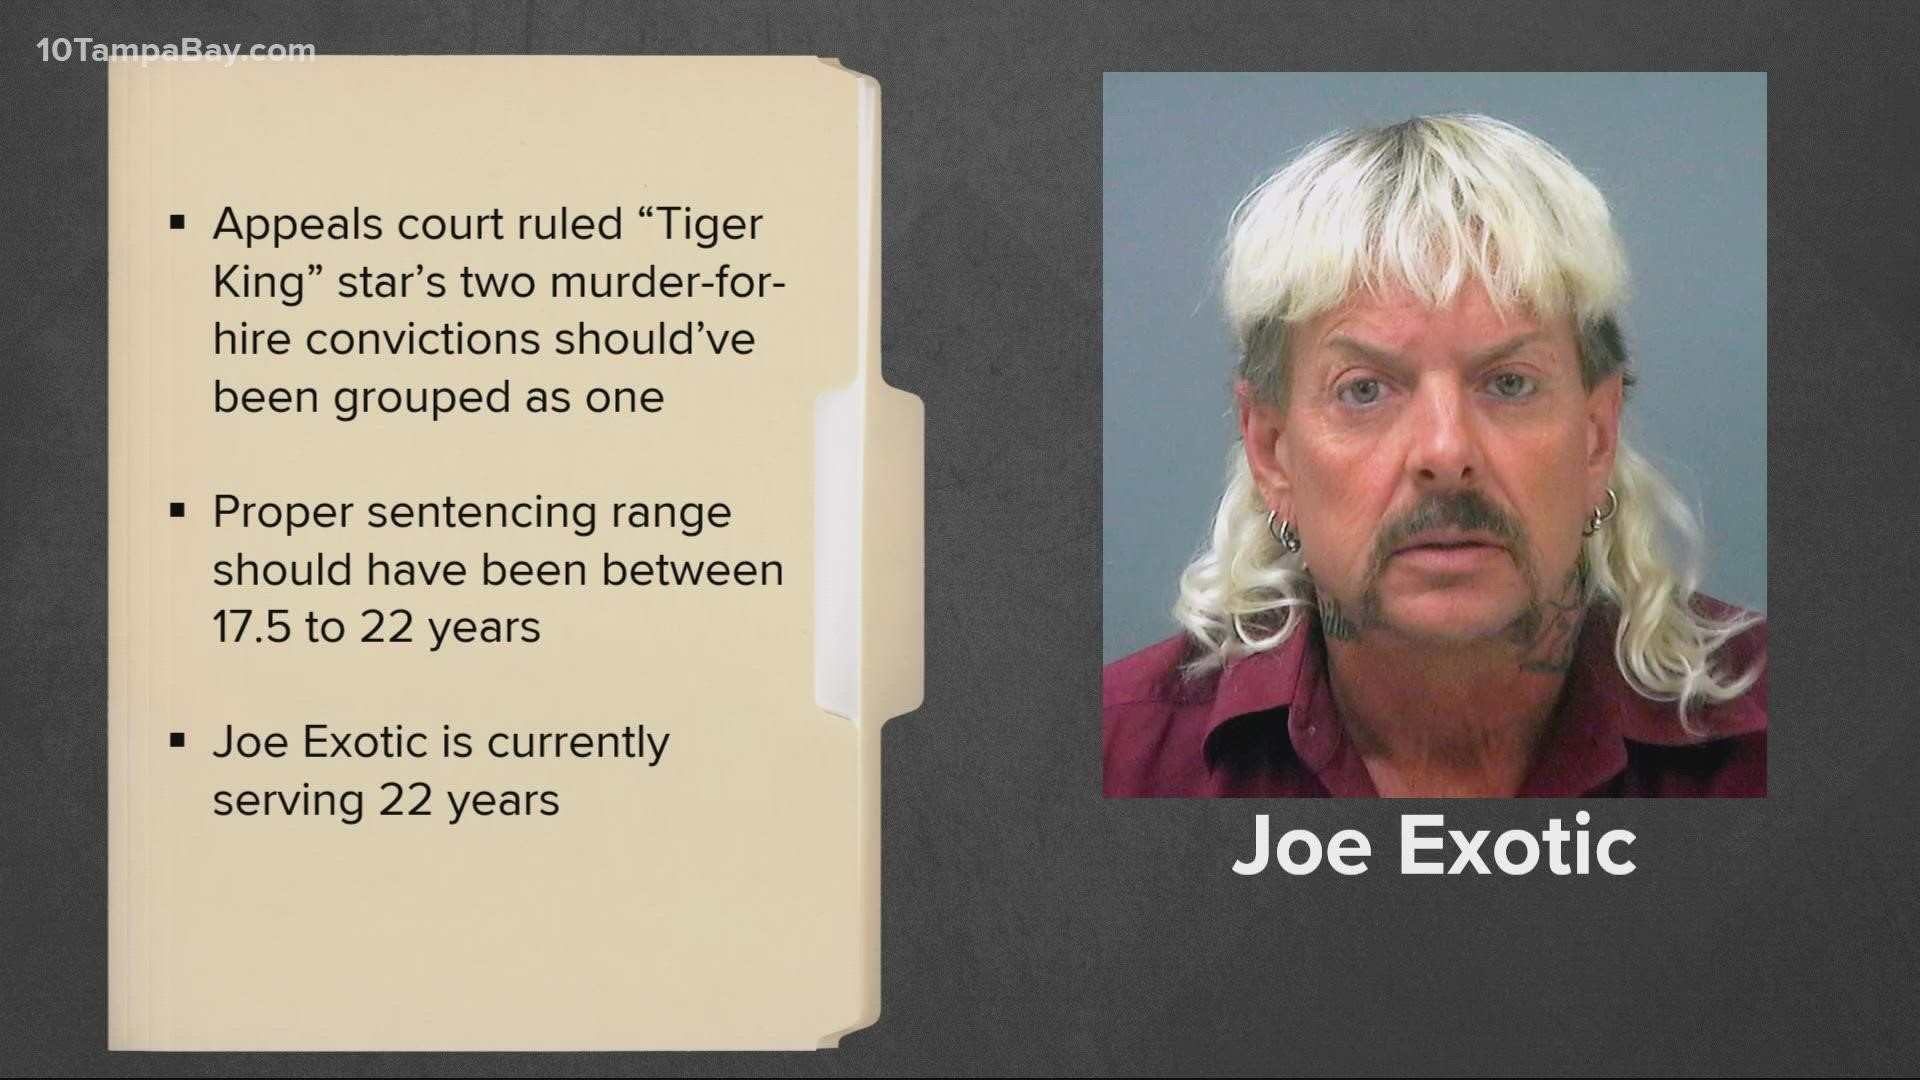 A federal appeals court in July ruled that Joe Exotic, whose real name is Joseph Maldonado-Passage, should get a shorter sentence.